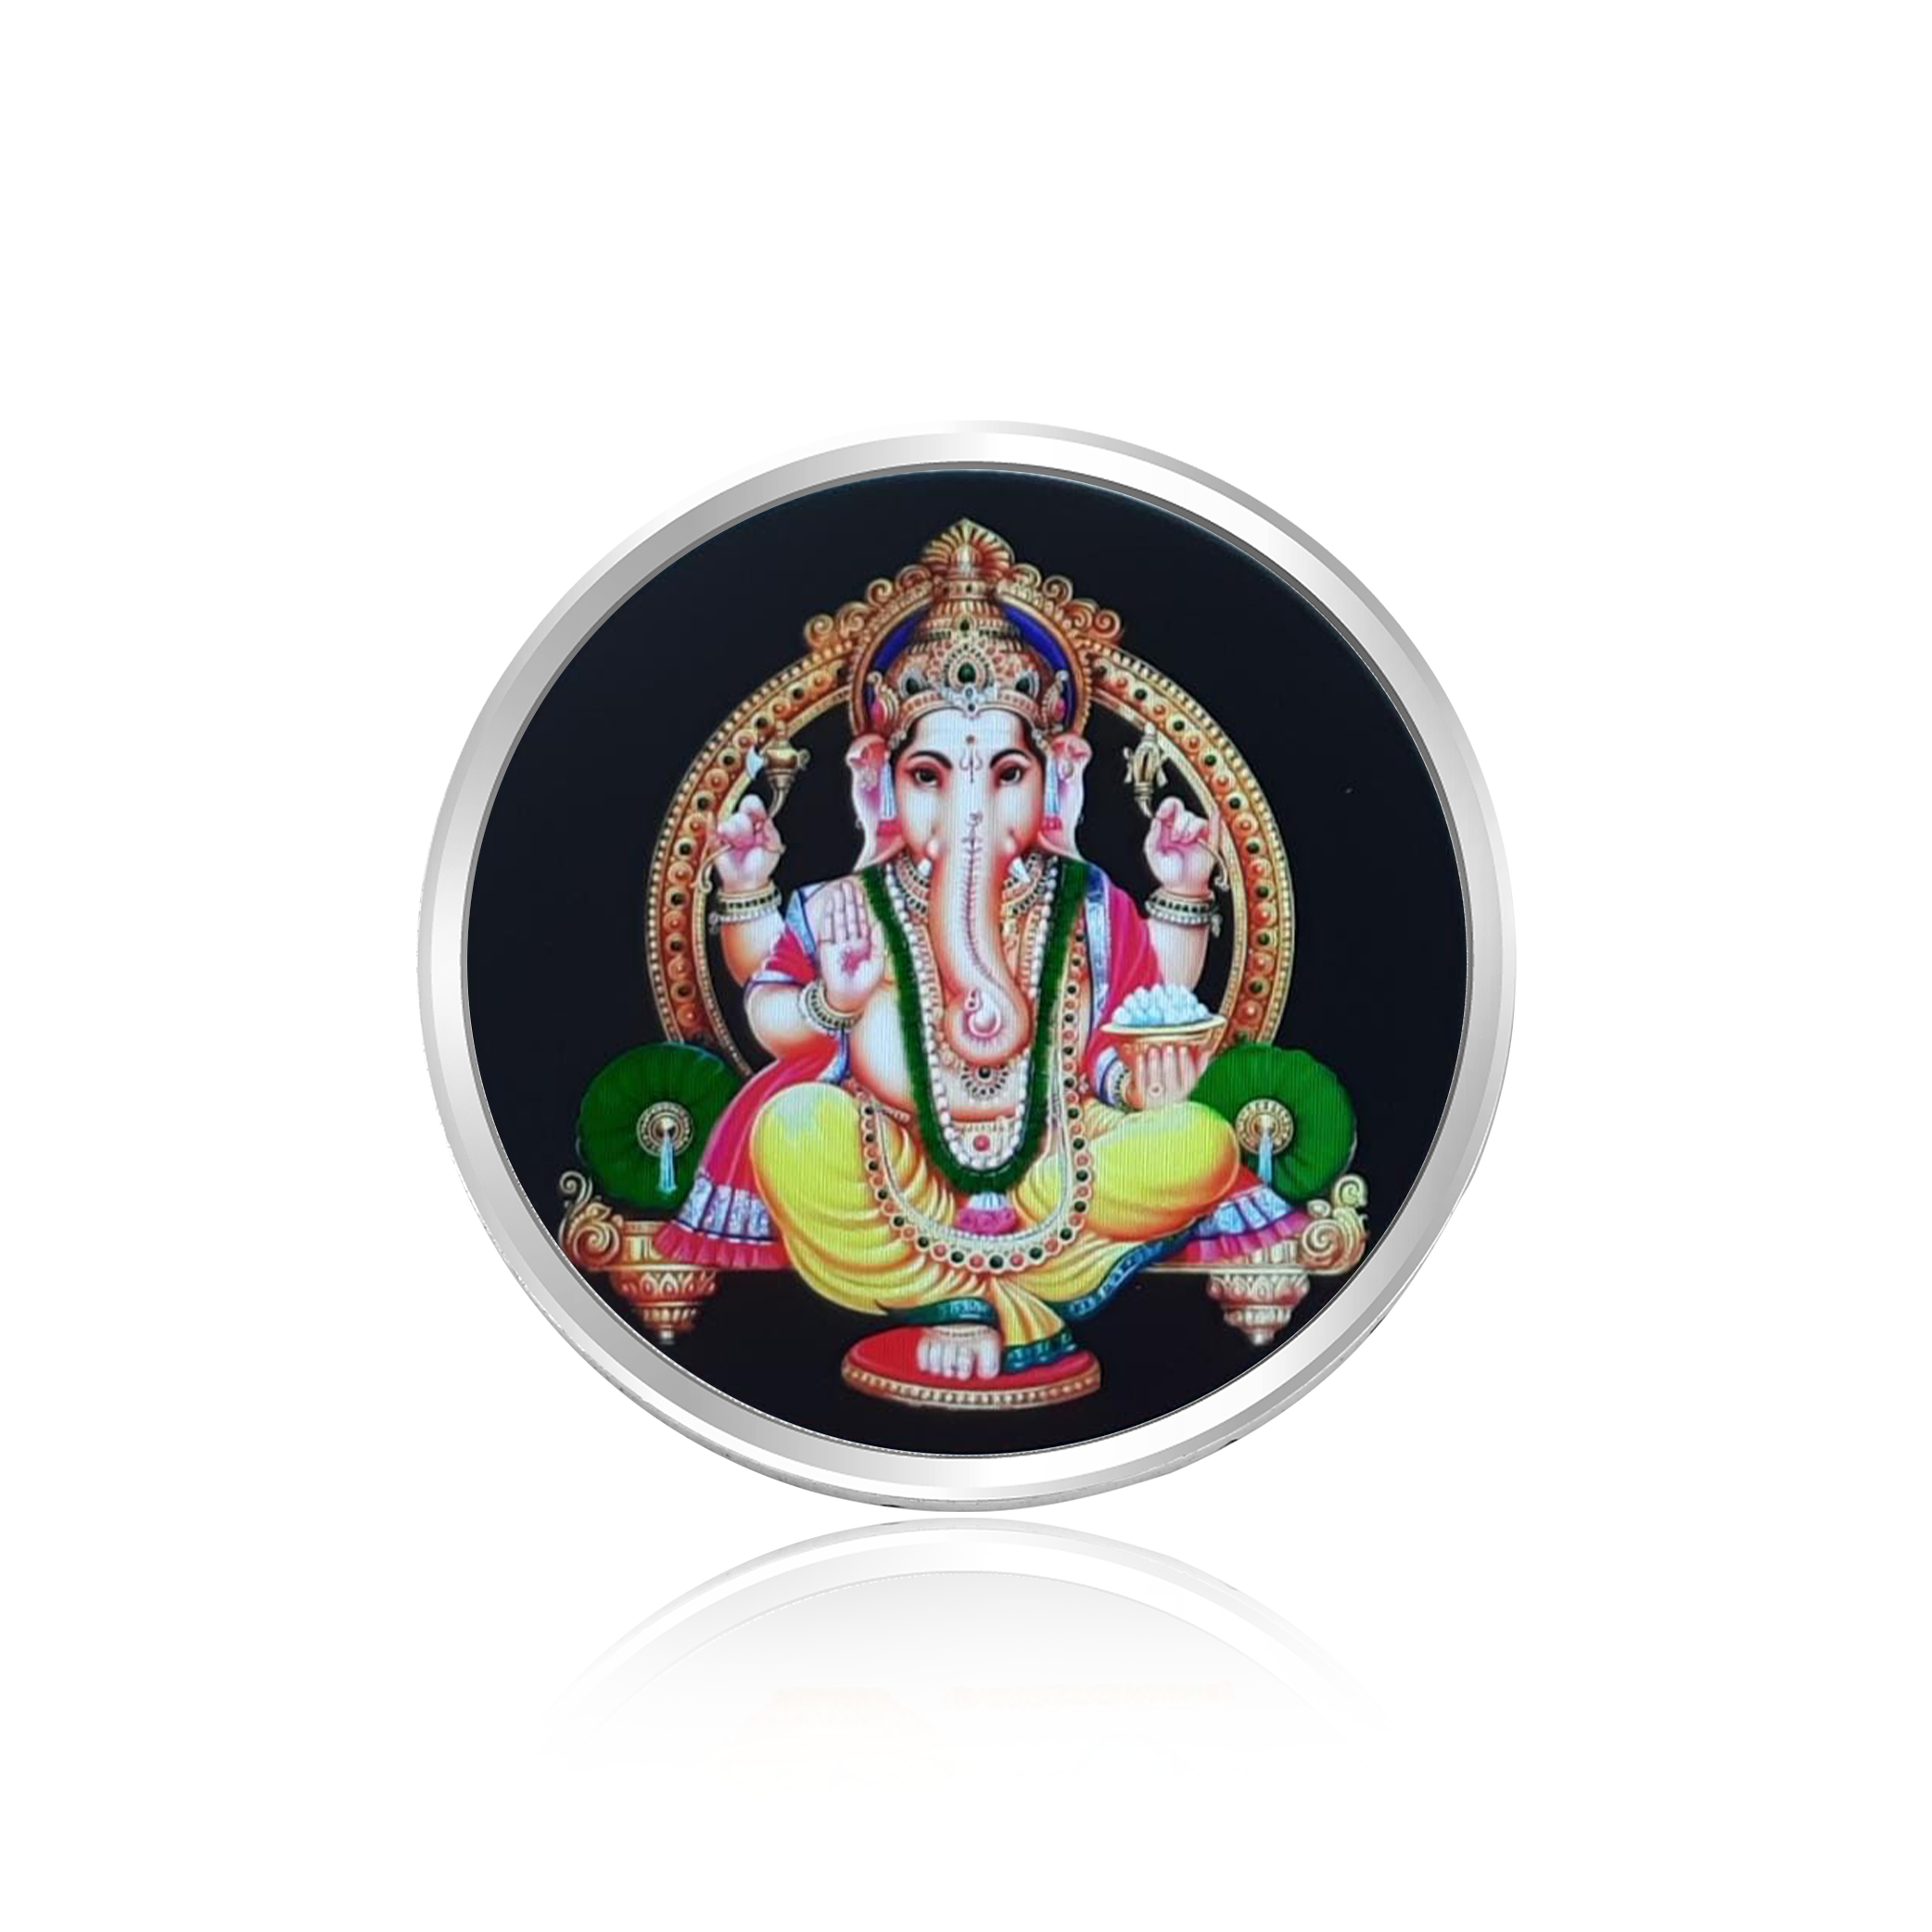 Divinely Crafted 20gms Ganesha Silver Coin